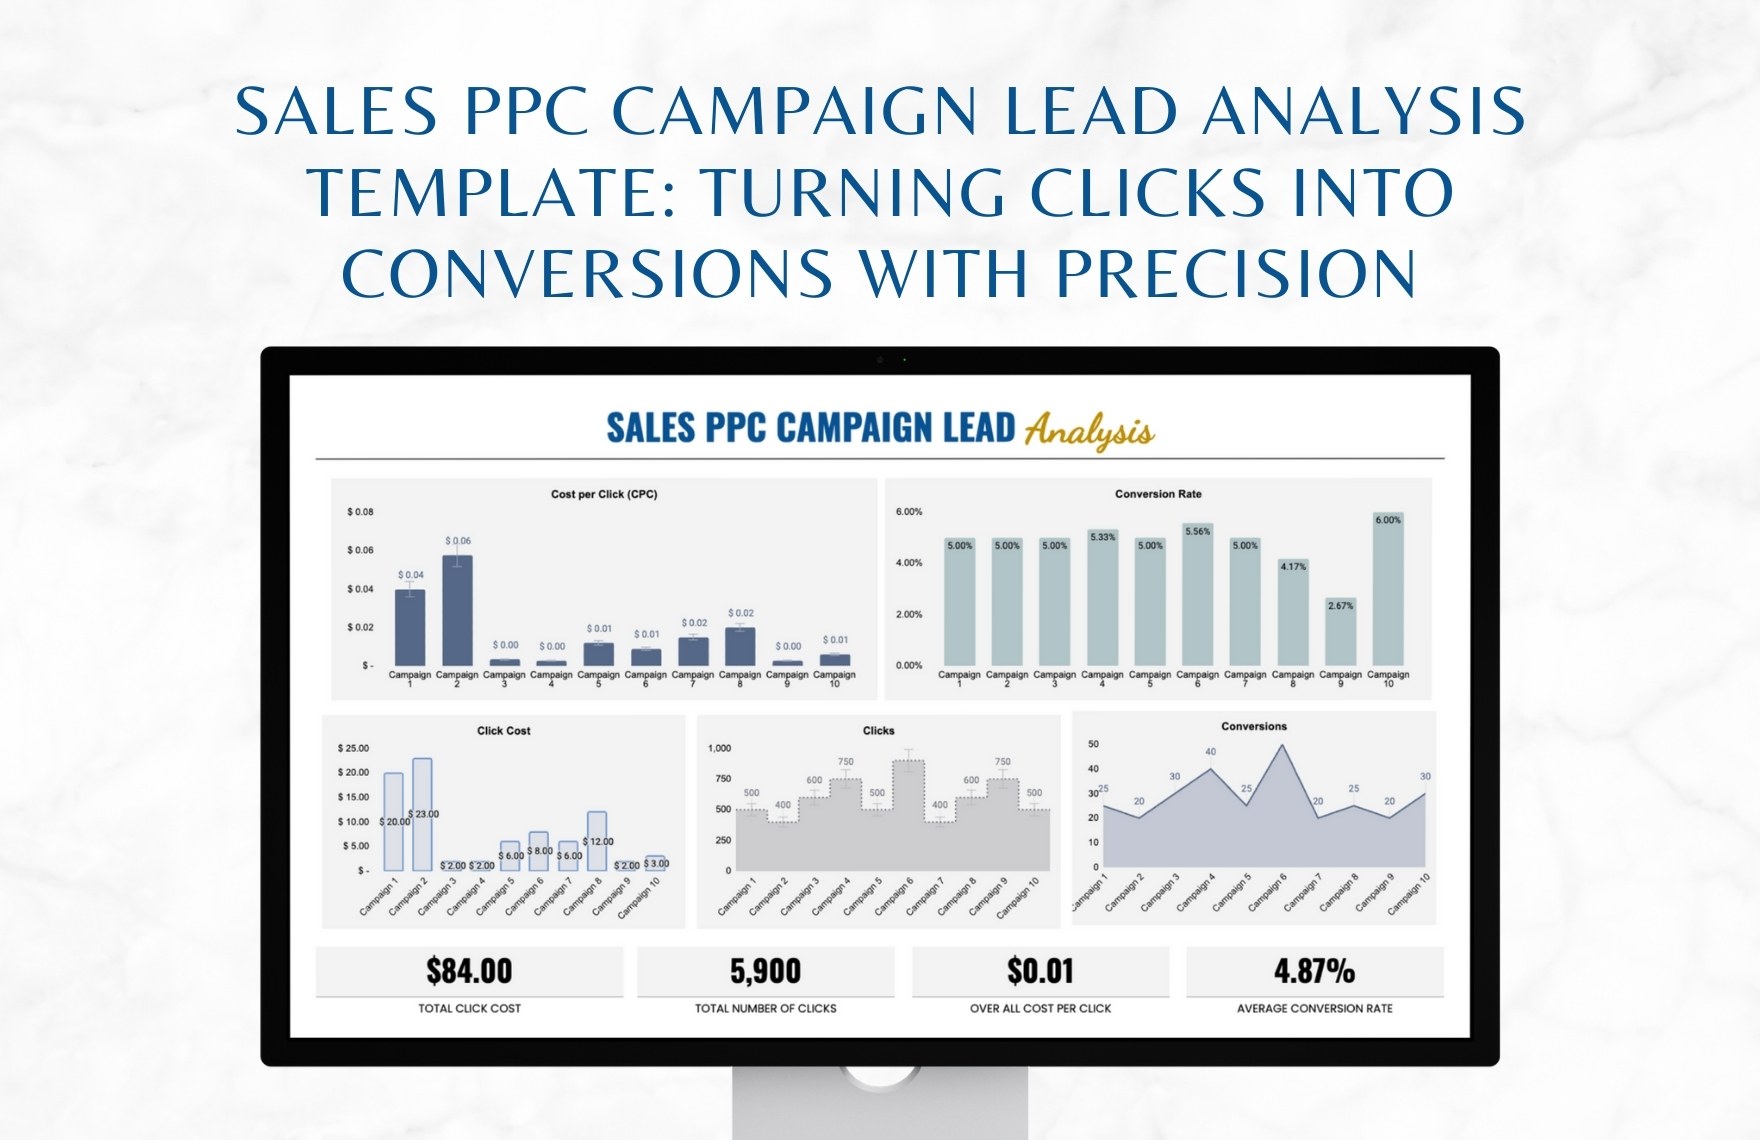 Sales PPC Campaign Lead Analysis Template